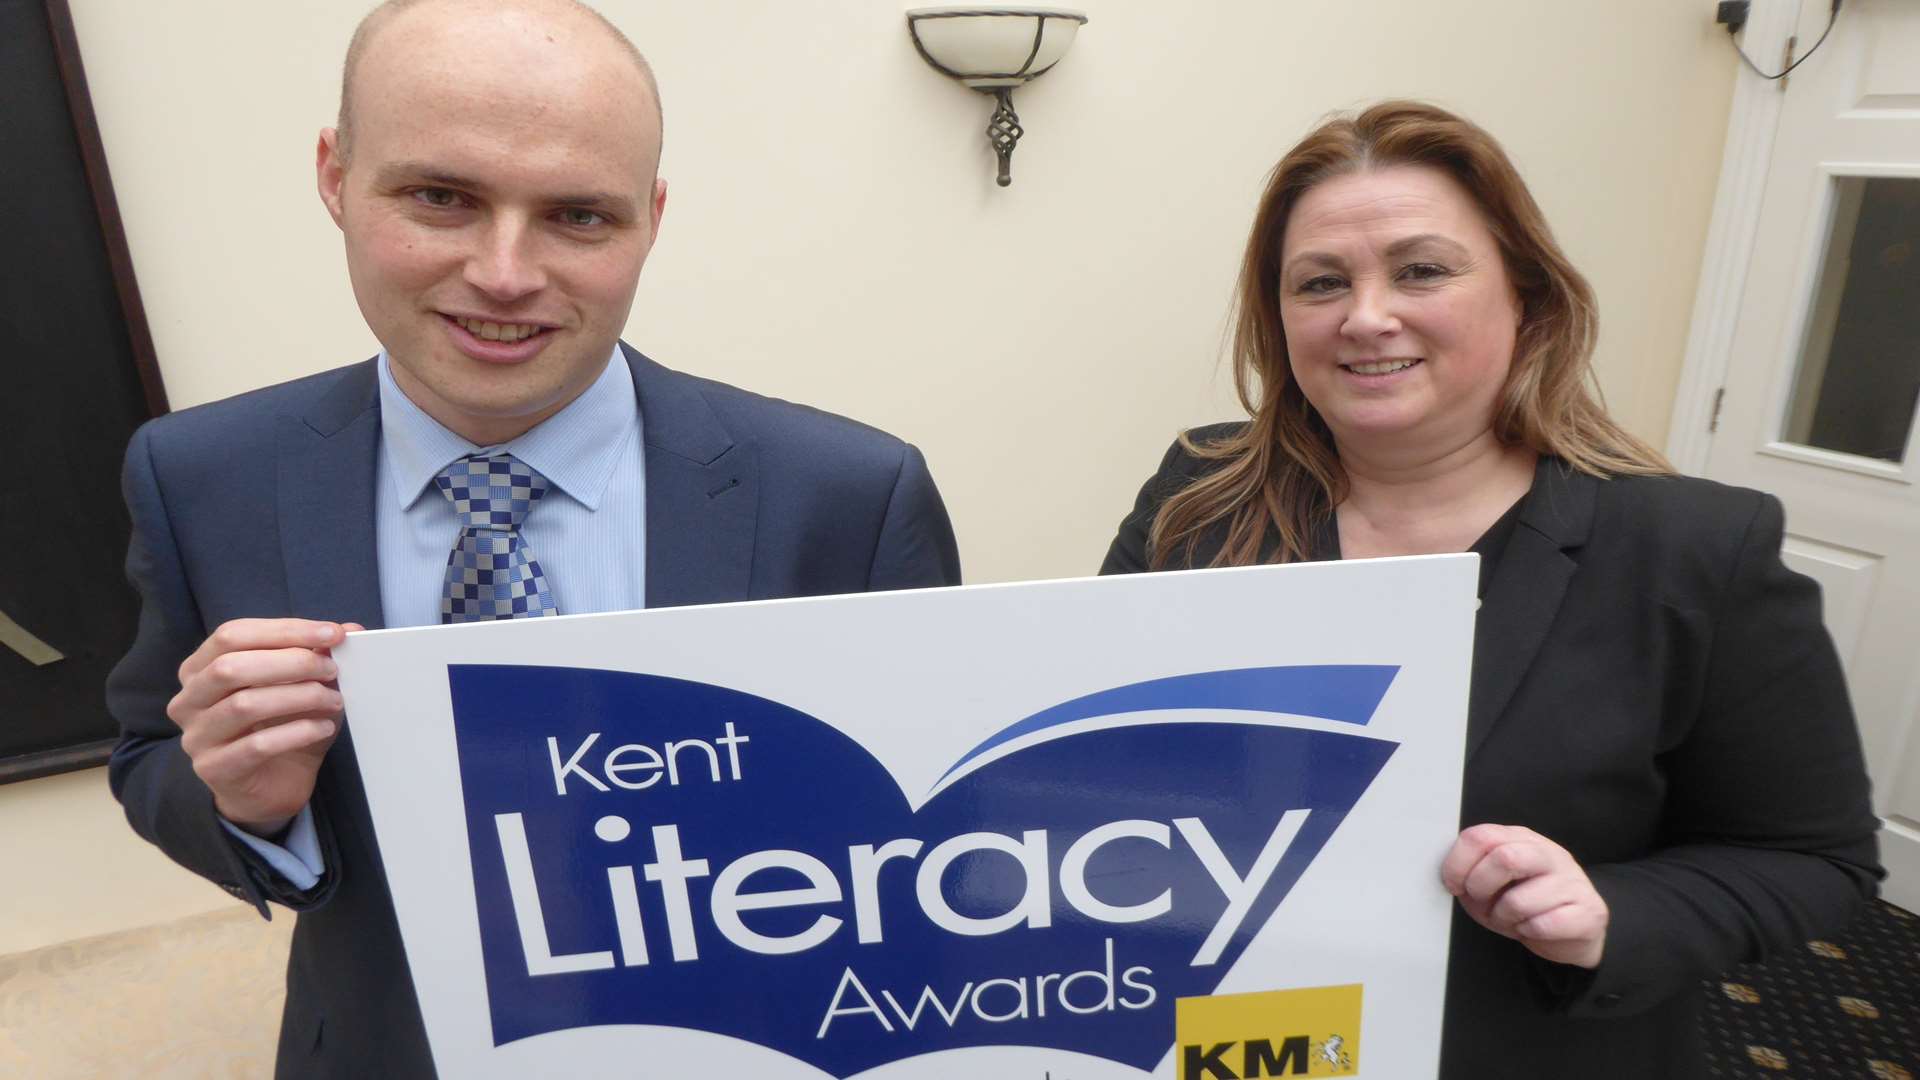 Leigh Jones and Karen Gray of McCabe Ford Williams which is a key partner of the Kent Literacy Awards 2017.